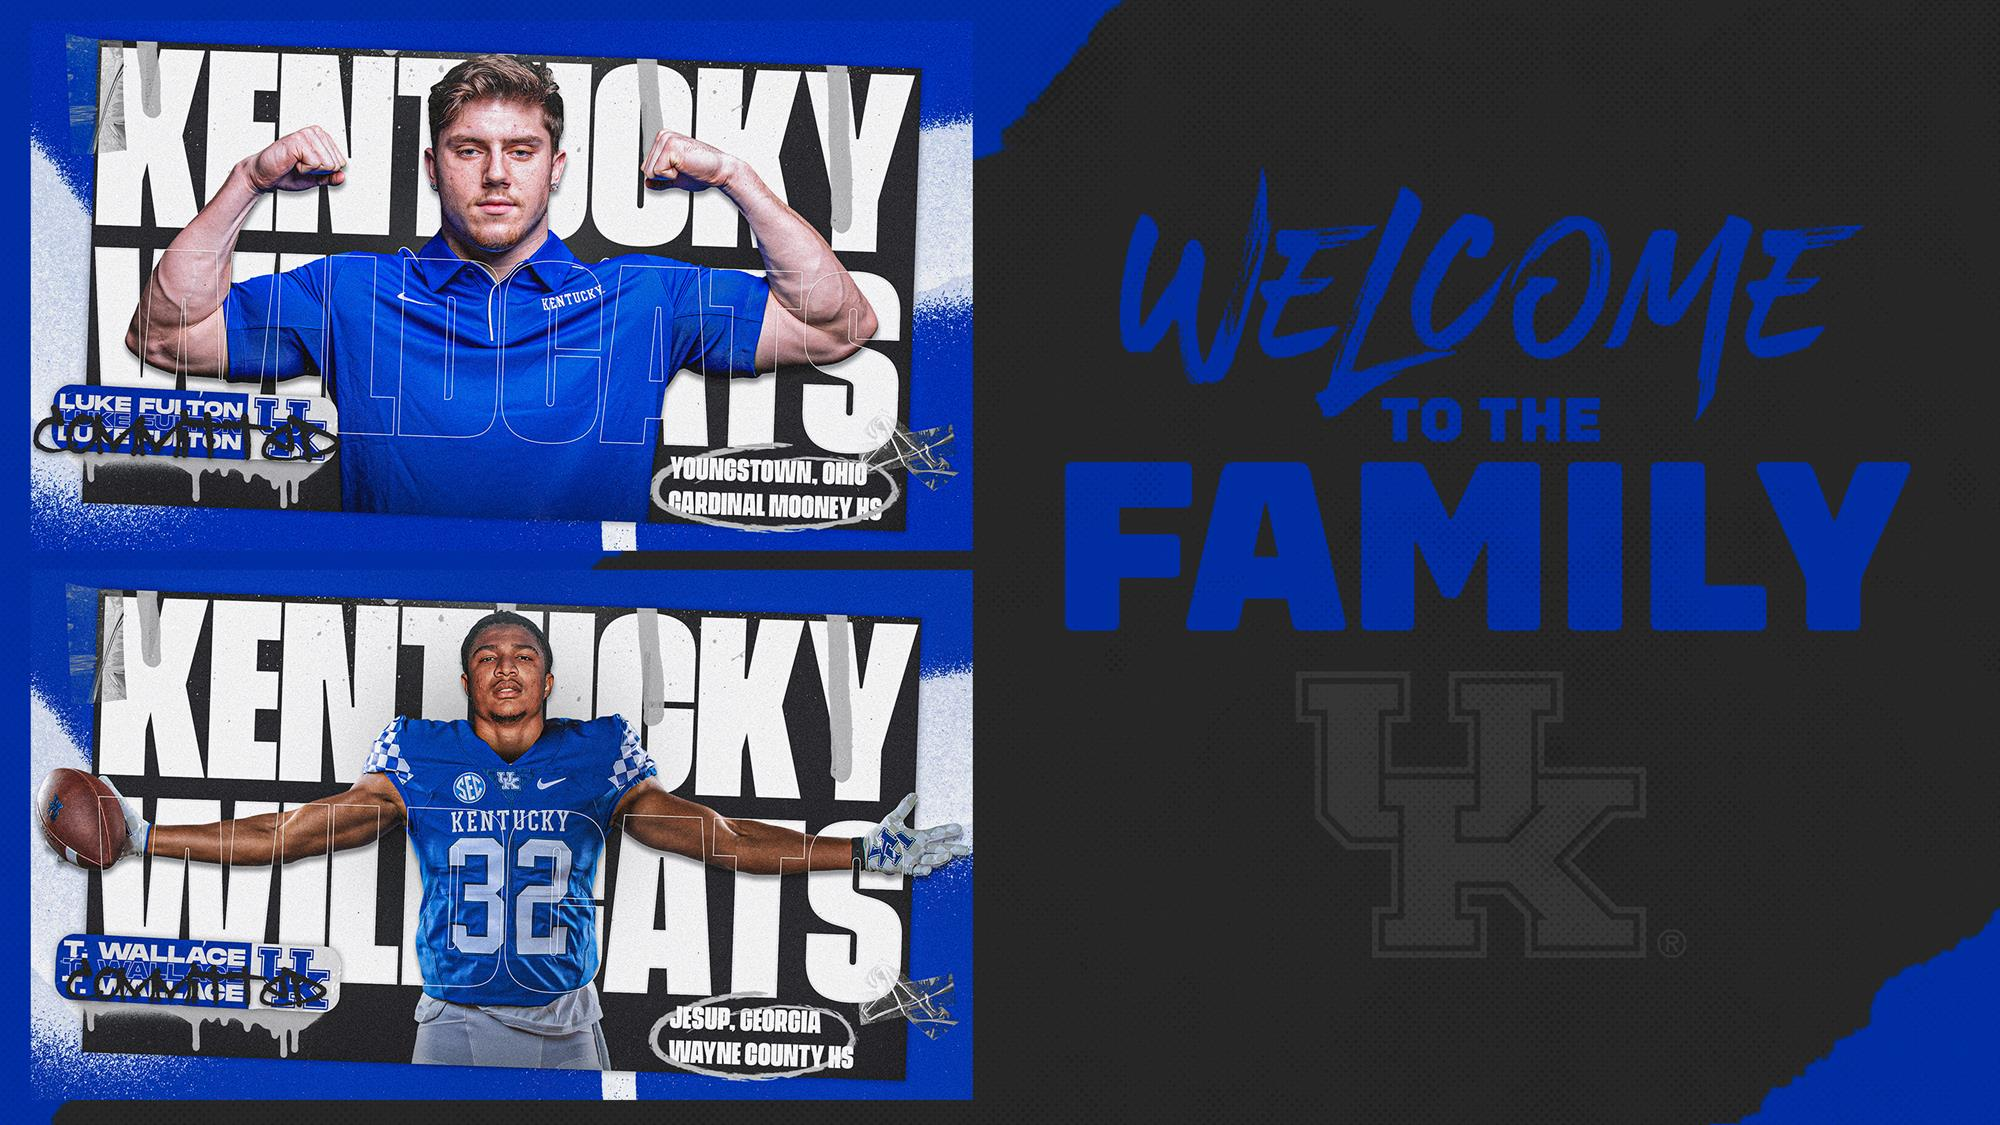 Kentucky Adds Two Top Recruits to 2021 Signing Class